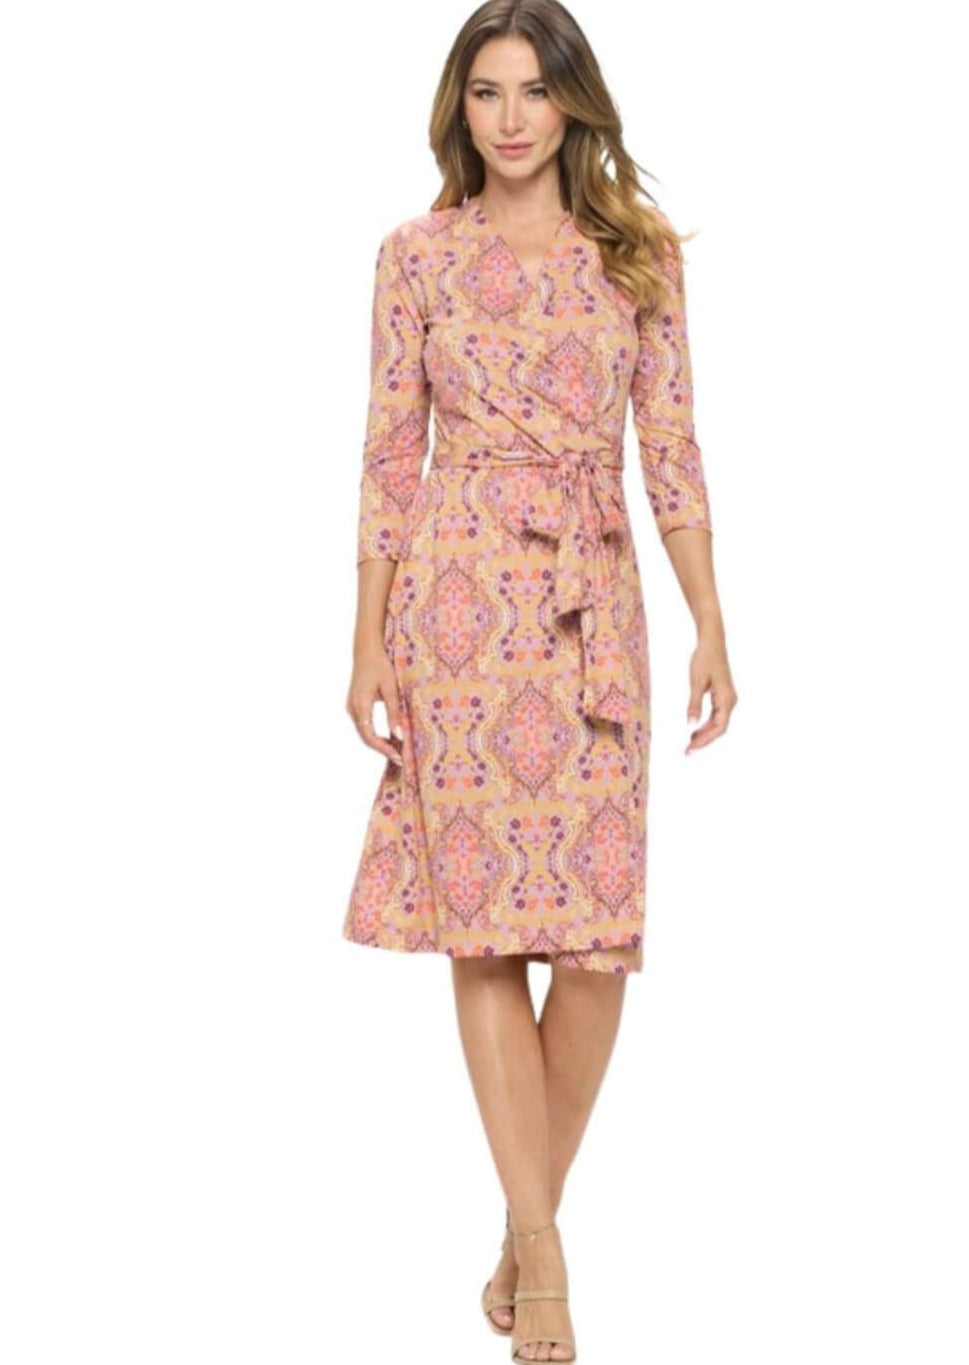 USA Made Beautiful Ladies Pink Lavender & Coral Floral Print Midi Wrap Dress Renee C. Style # 4329DRY | Proudly Made in USA | Classy Cozy Cool Clothing Boutique